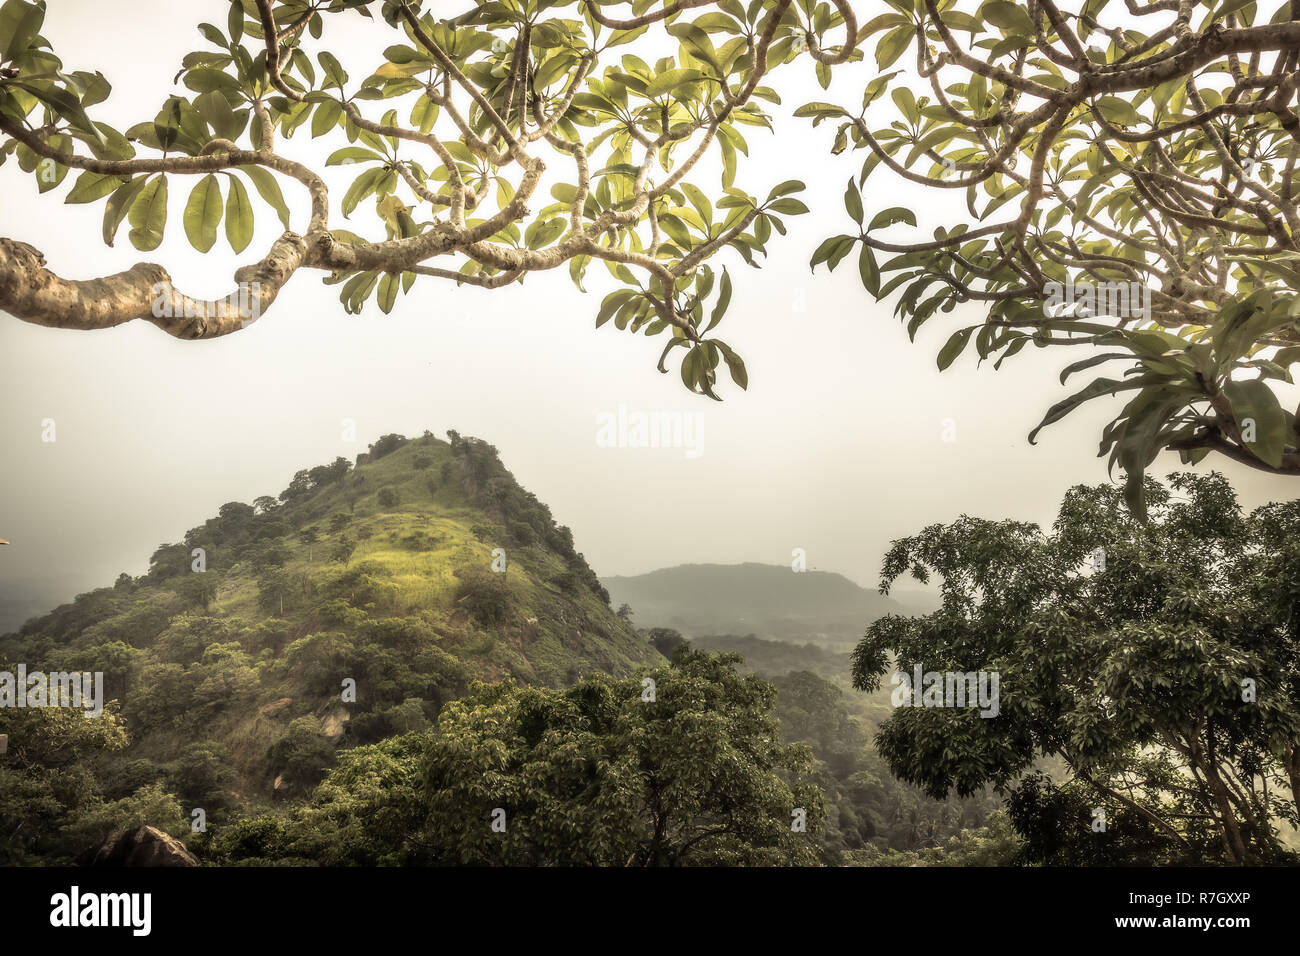 Highlands hill forest landscape with view from the trees in Asia Sri Lanka Dambulla surroundings Stock Photo